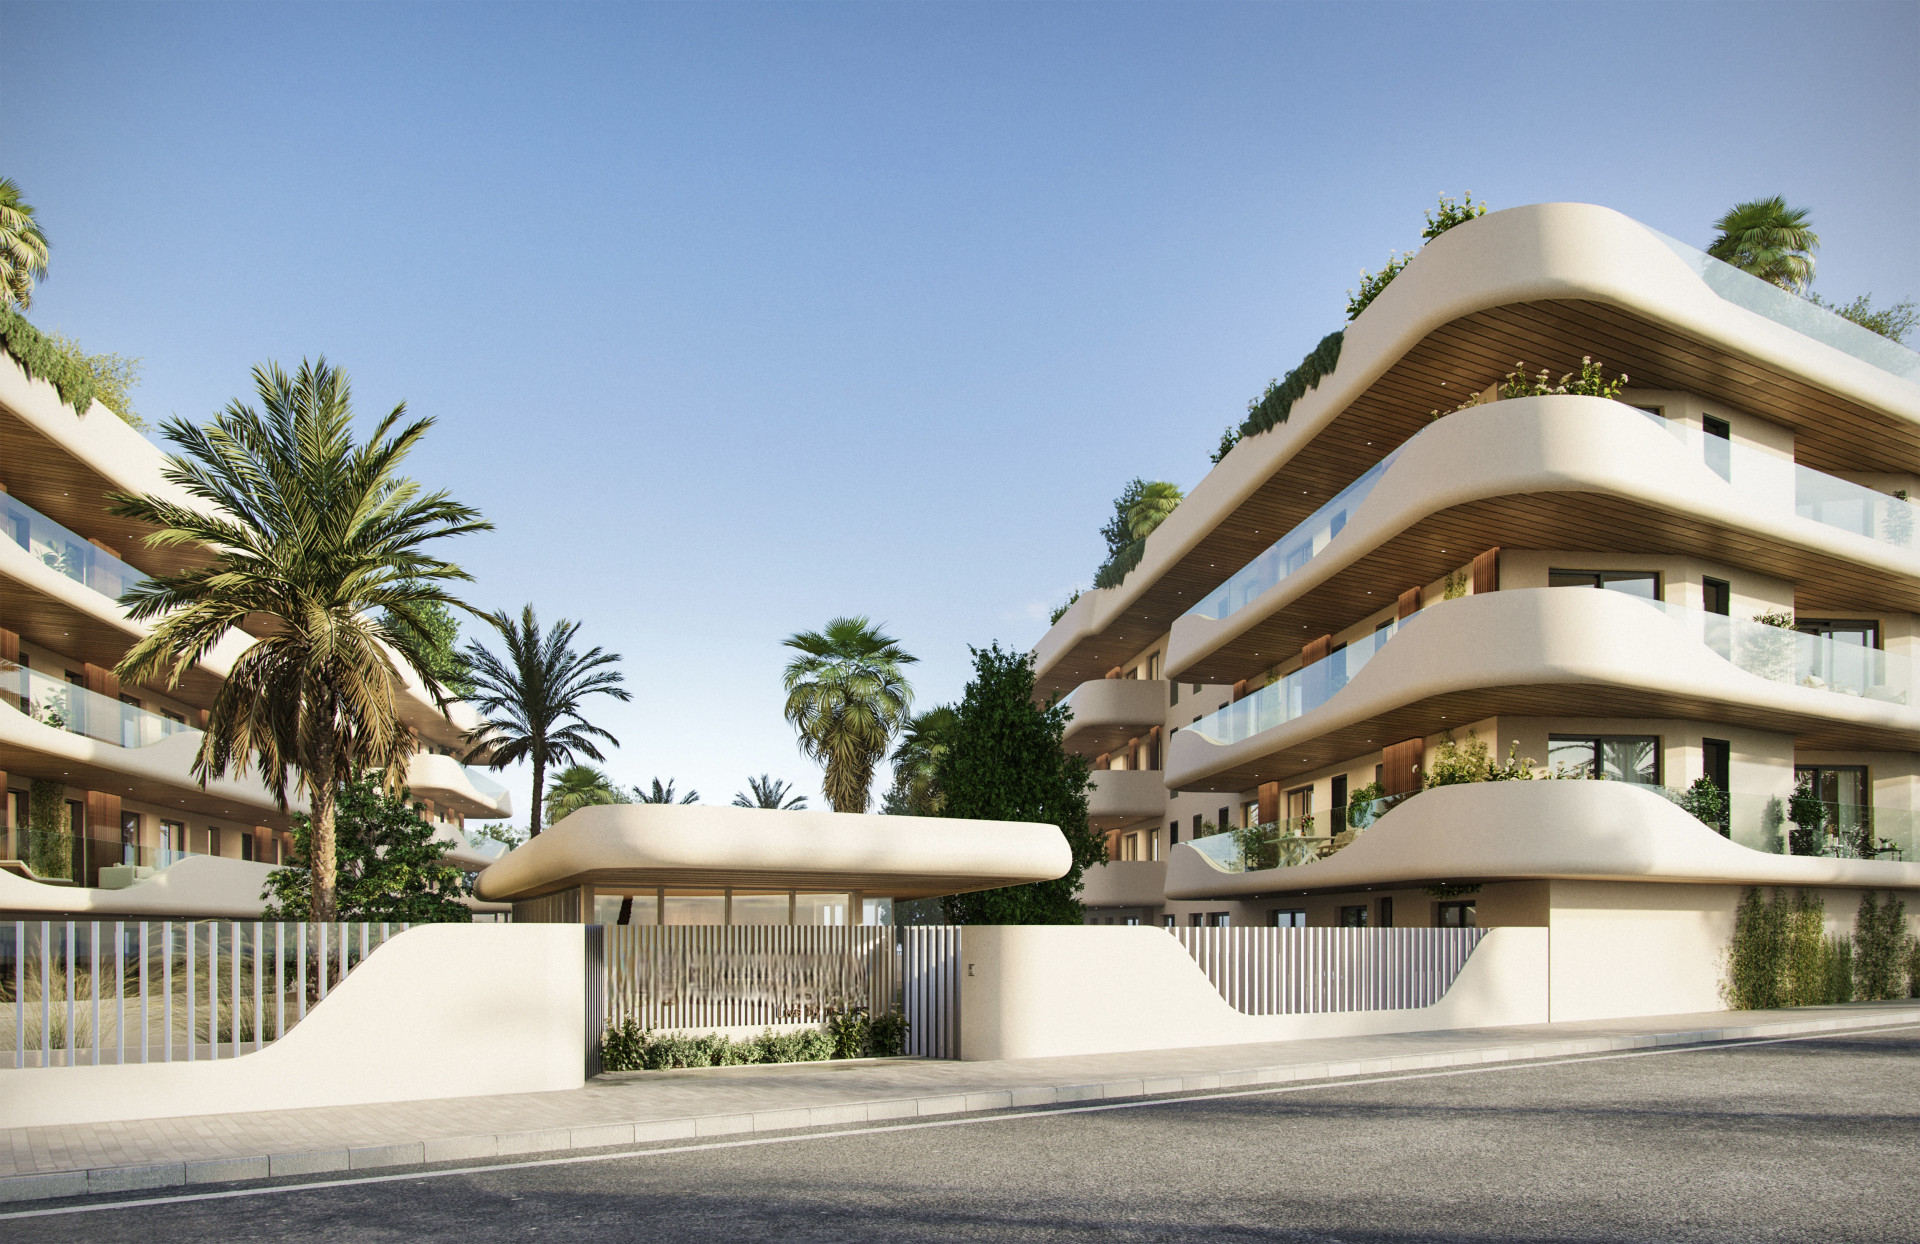 New and exclusive apartment complex offering 2 to 4 bedroom apartments and penthouses walking distance to San Pedro Alcantara